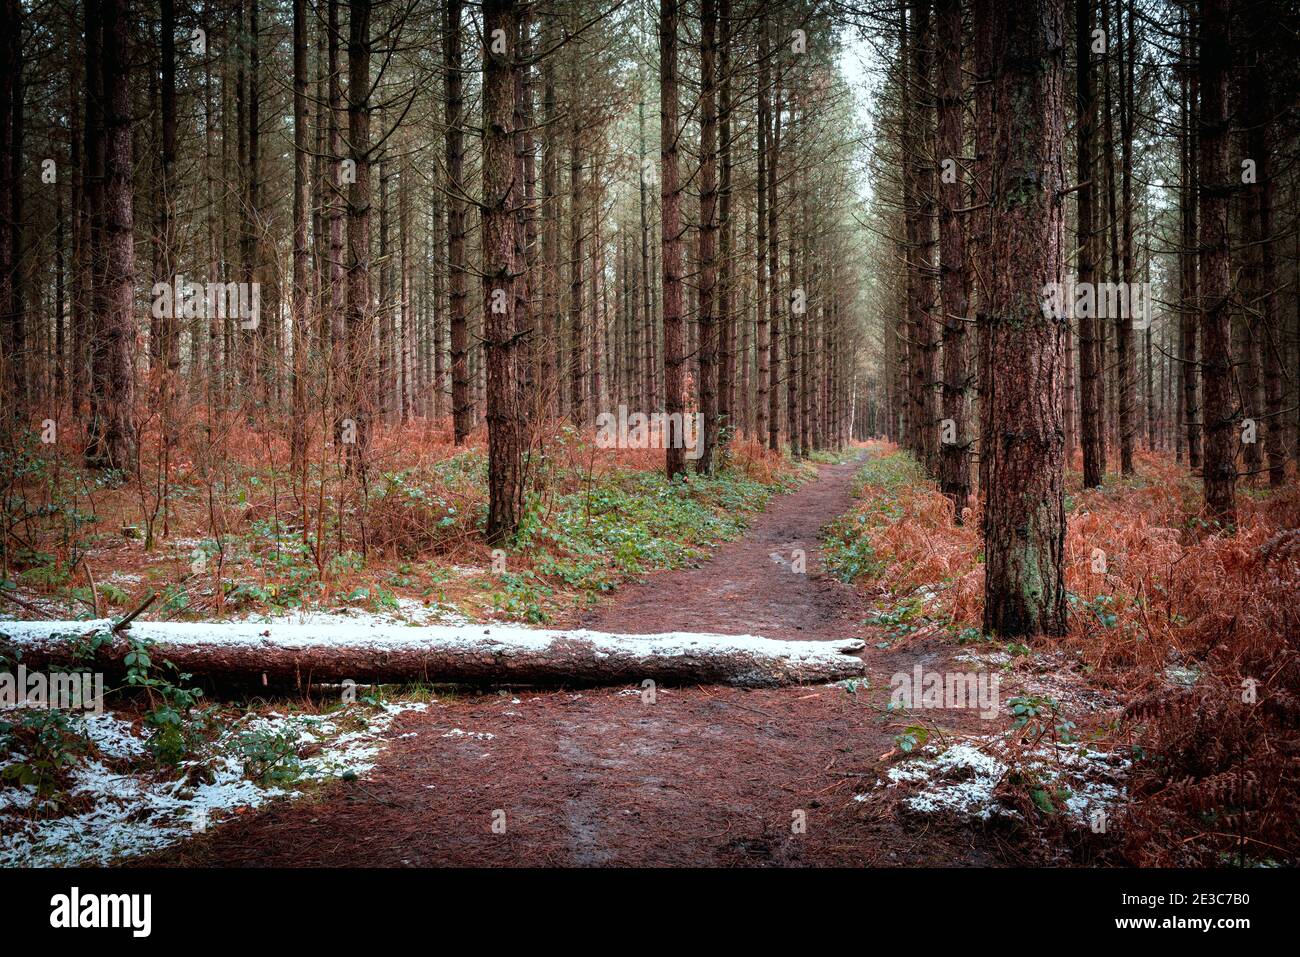 A  pine forest with a dusting of snow on the ground. Blidworth Woods, Nottingham, England UK Stock Photo